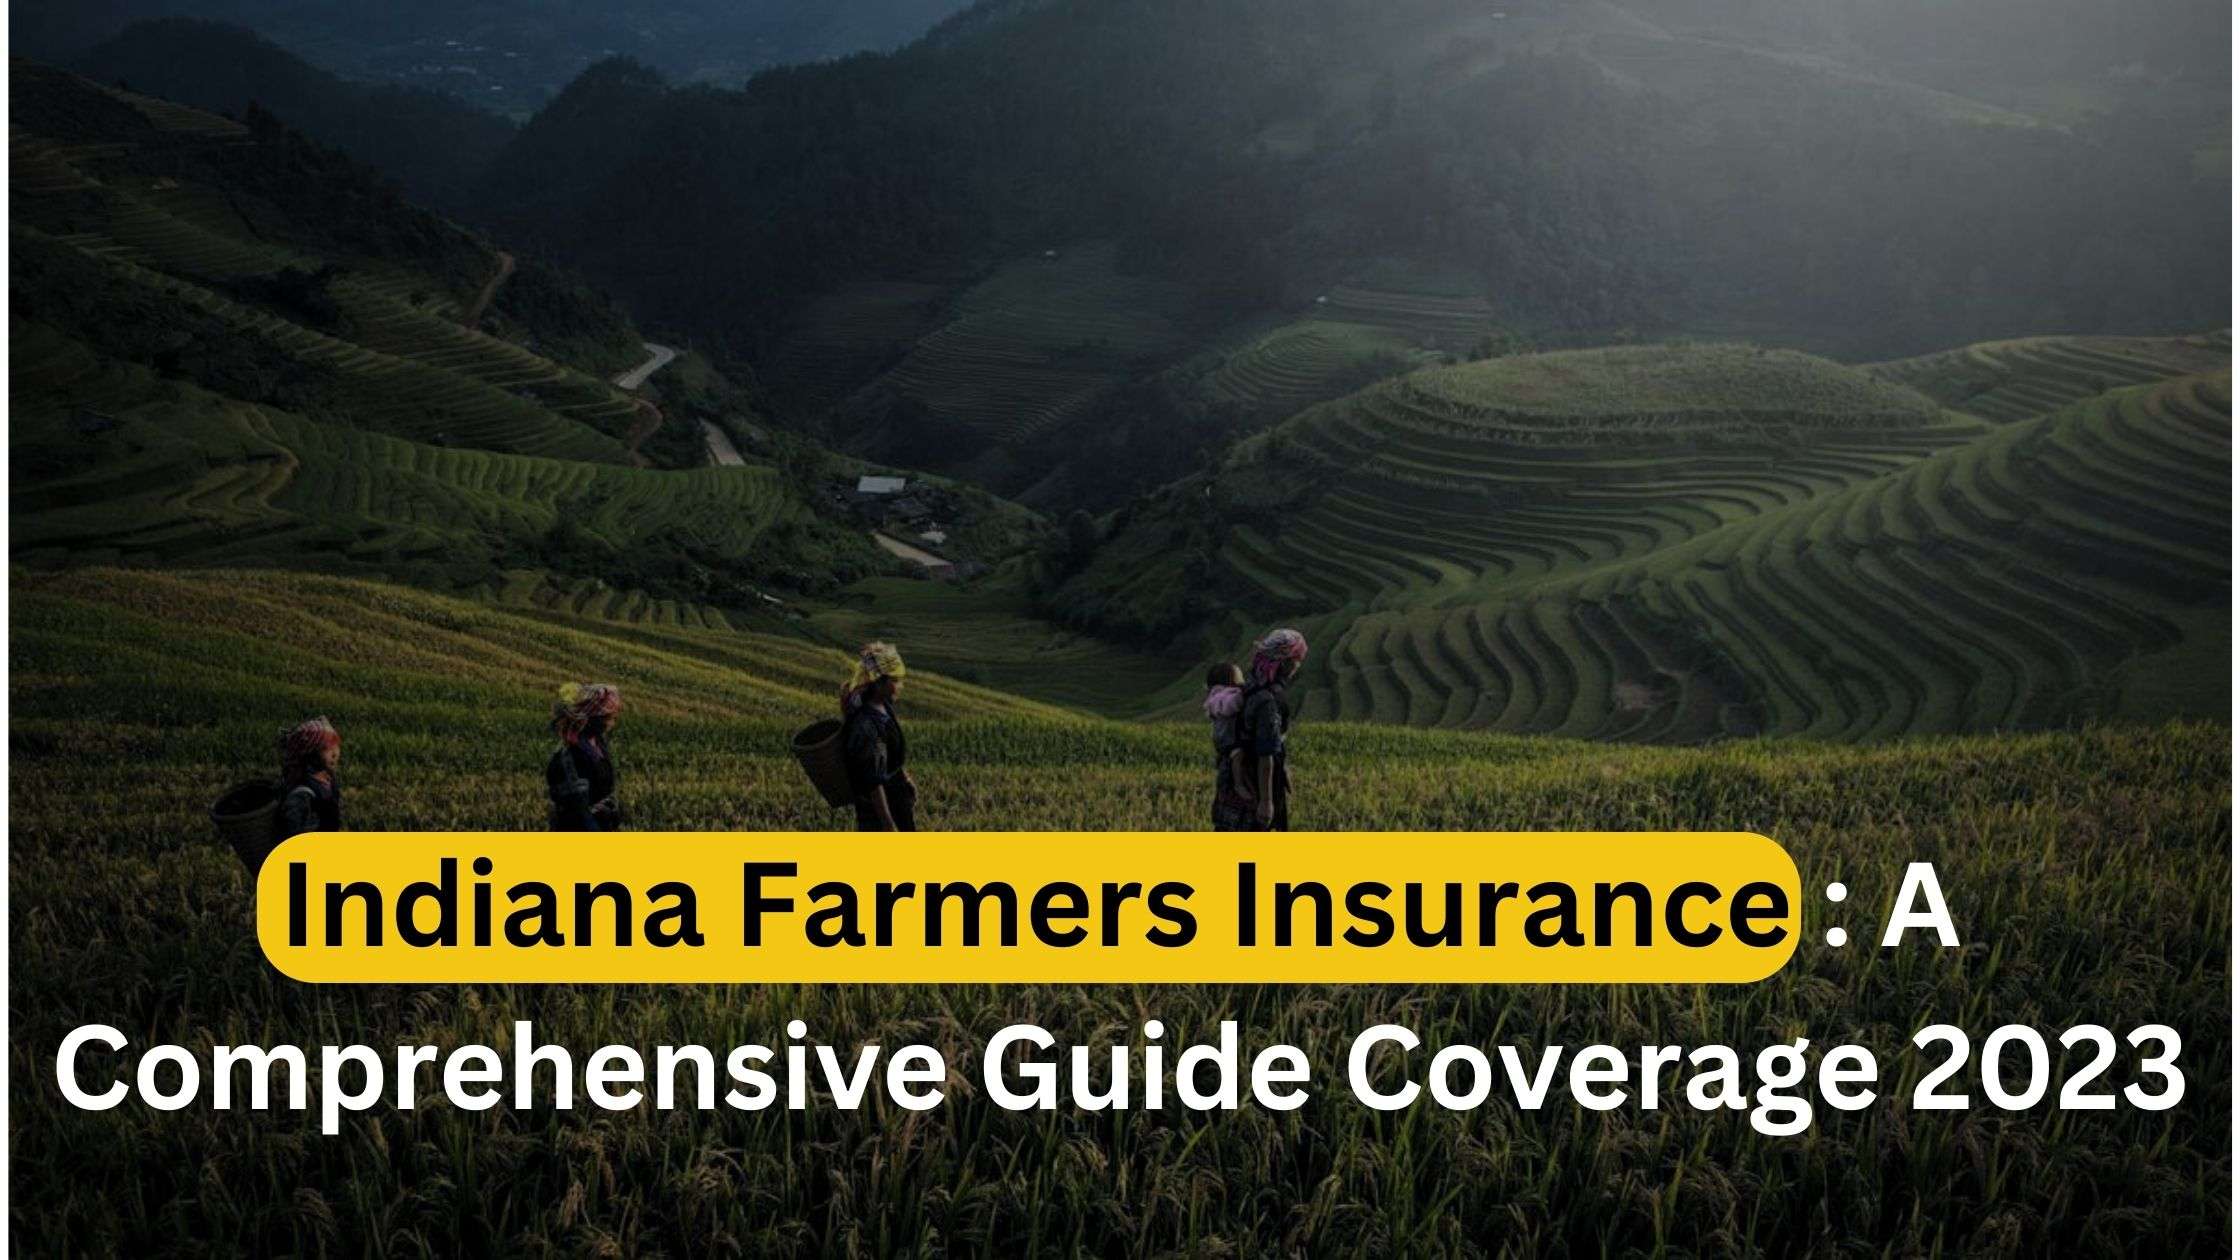 Indiana Farmers Insurance : A Comprehensive Guide Coverage 2023